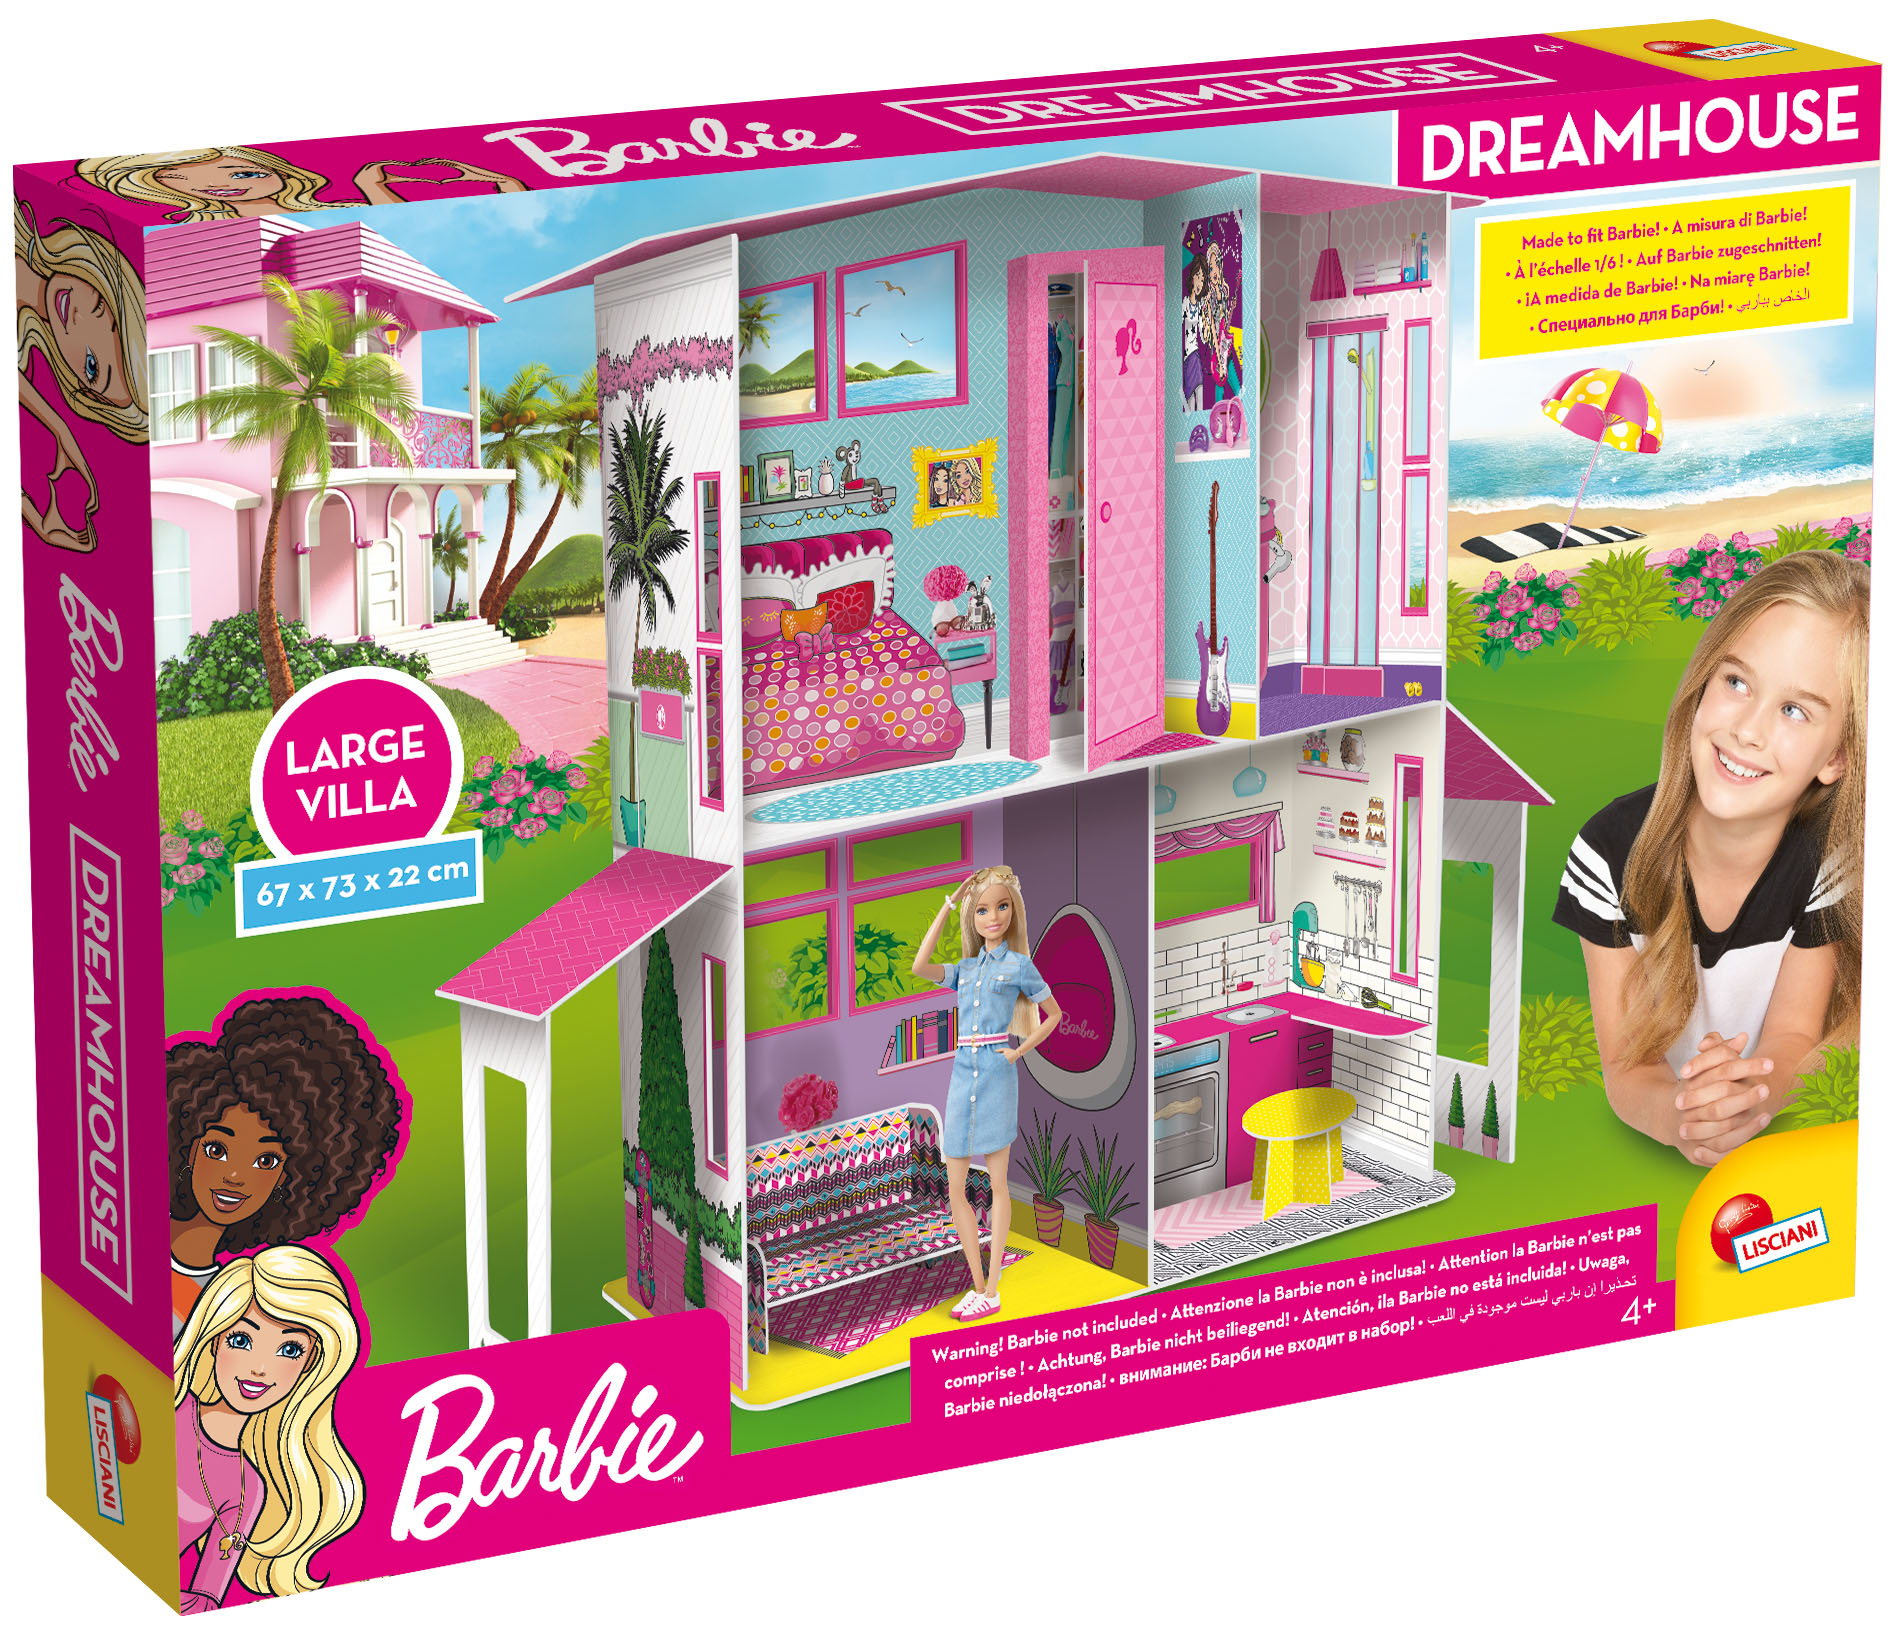 Photo 1 of the game BARBIE HOLIDAY HOUSE